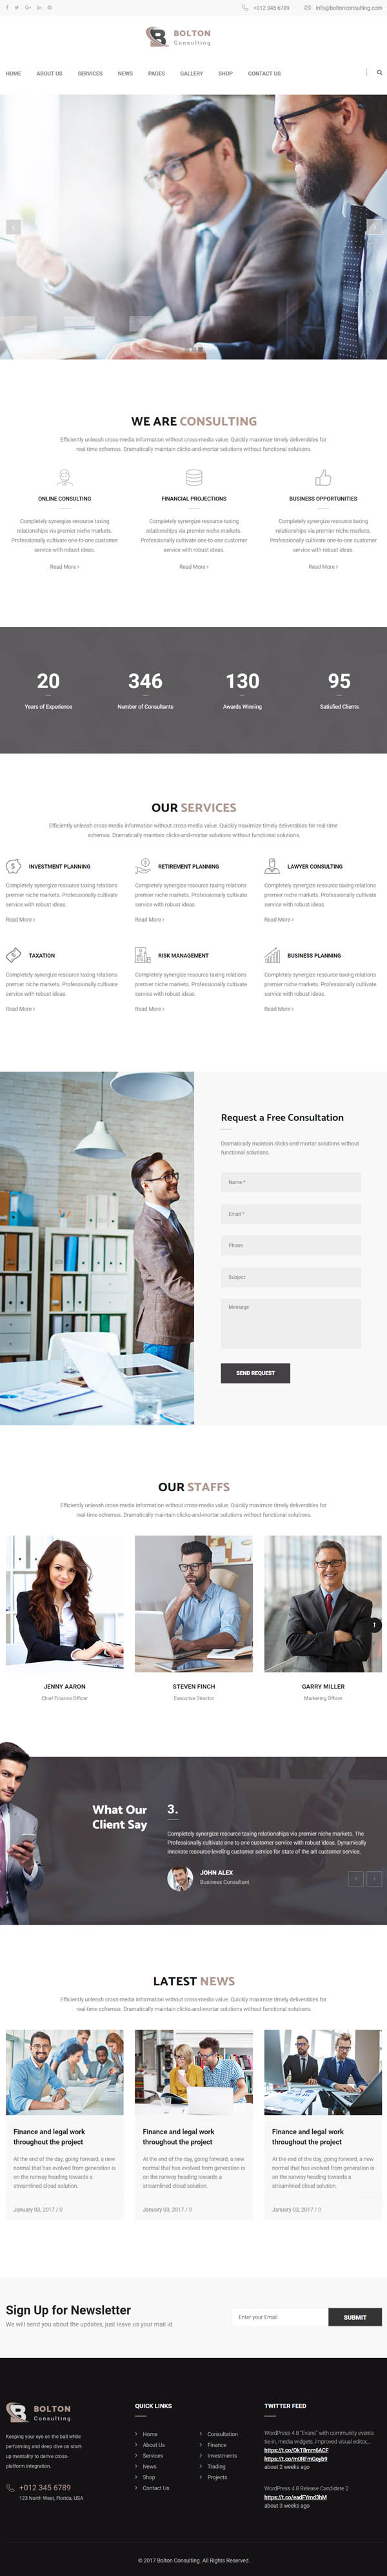 Bolton: Business Consulting and Professional Services WordPress Theme